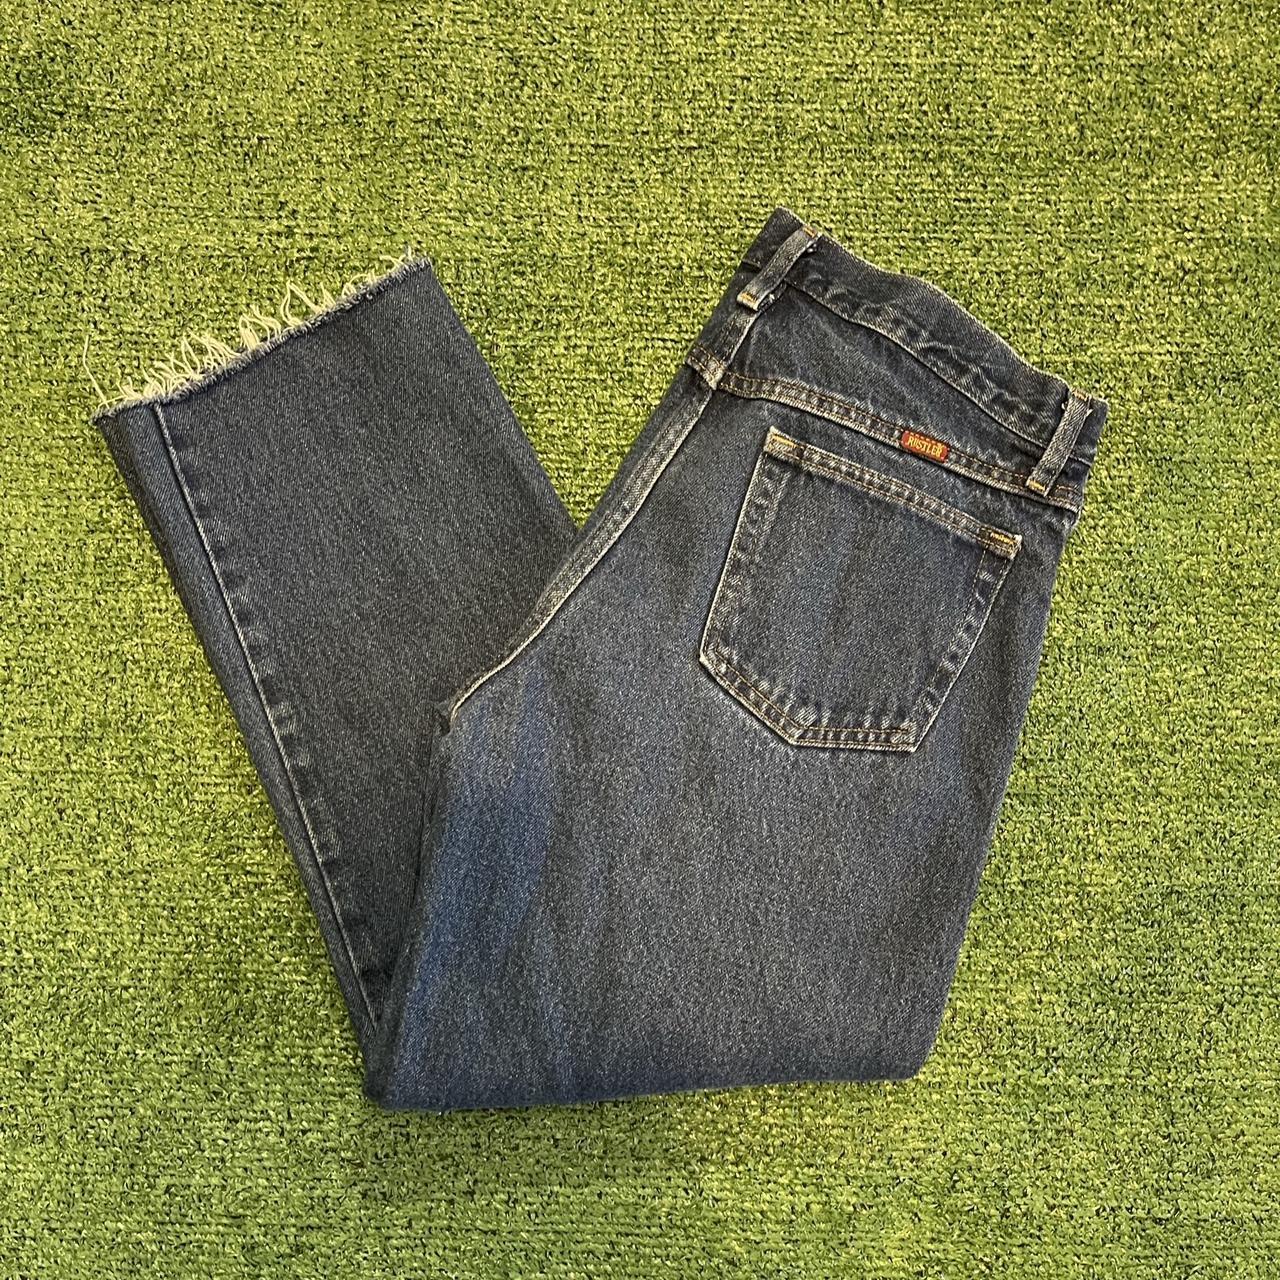 SUPER COOL WASH! Rustler jeans‼️ size 31x32; they are... - Depop